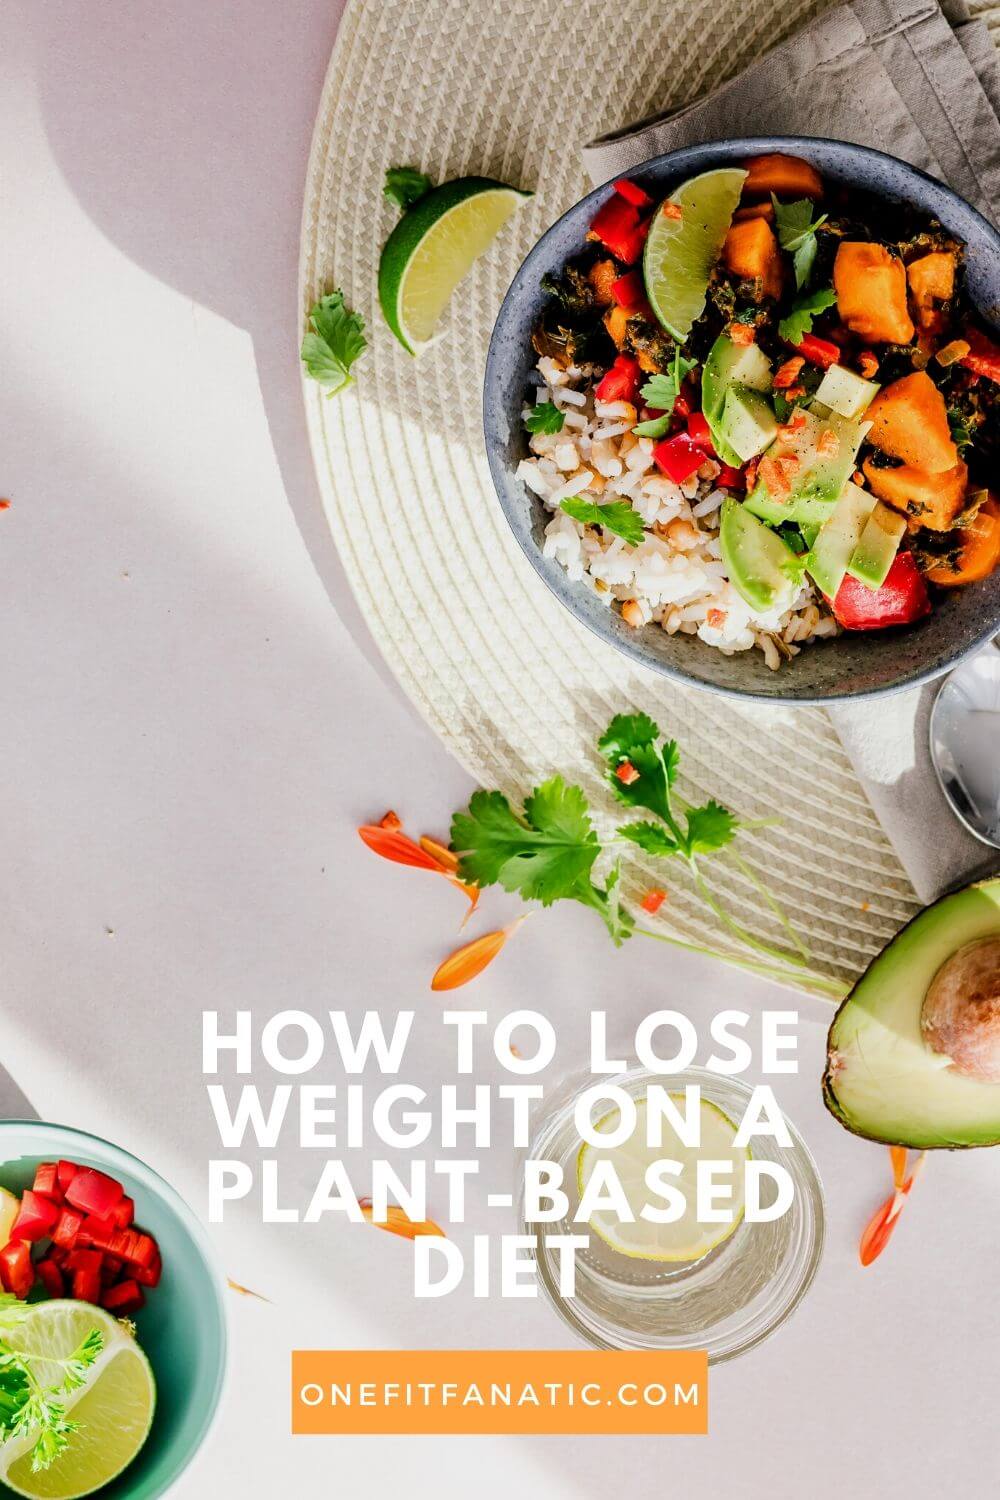 How To Lose Weight On a Plant-Based, Vegan Diet | Forks 